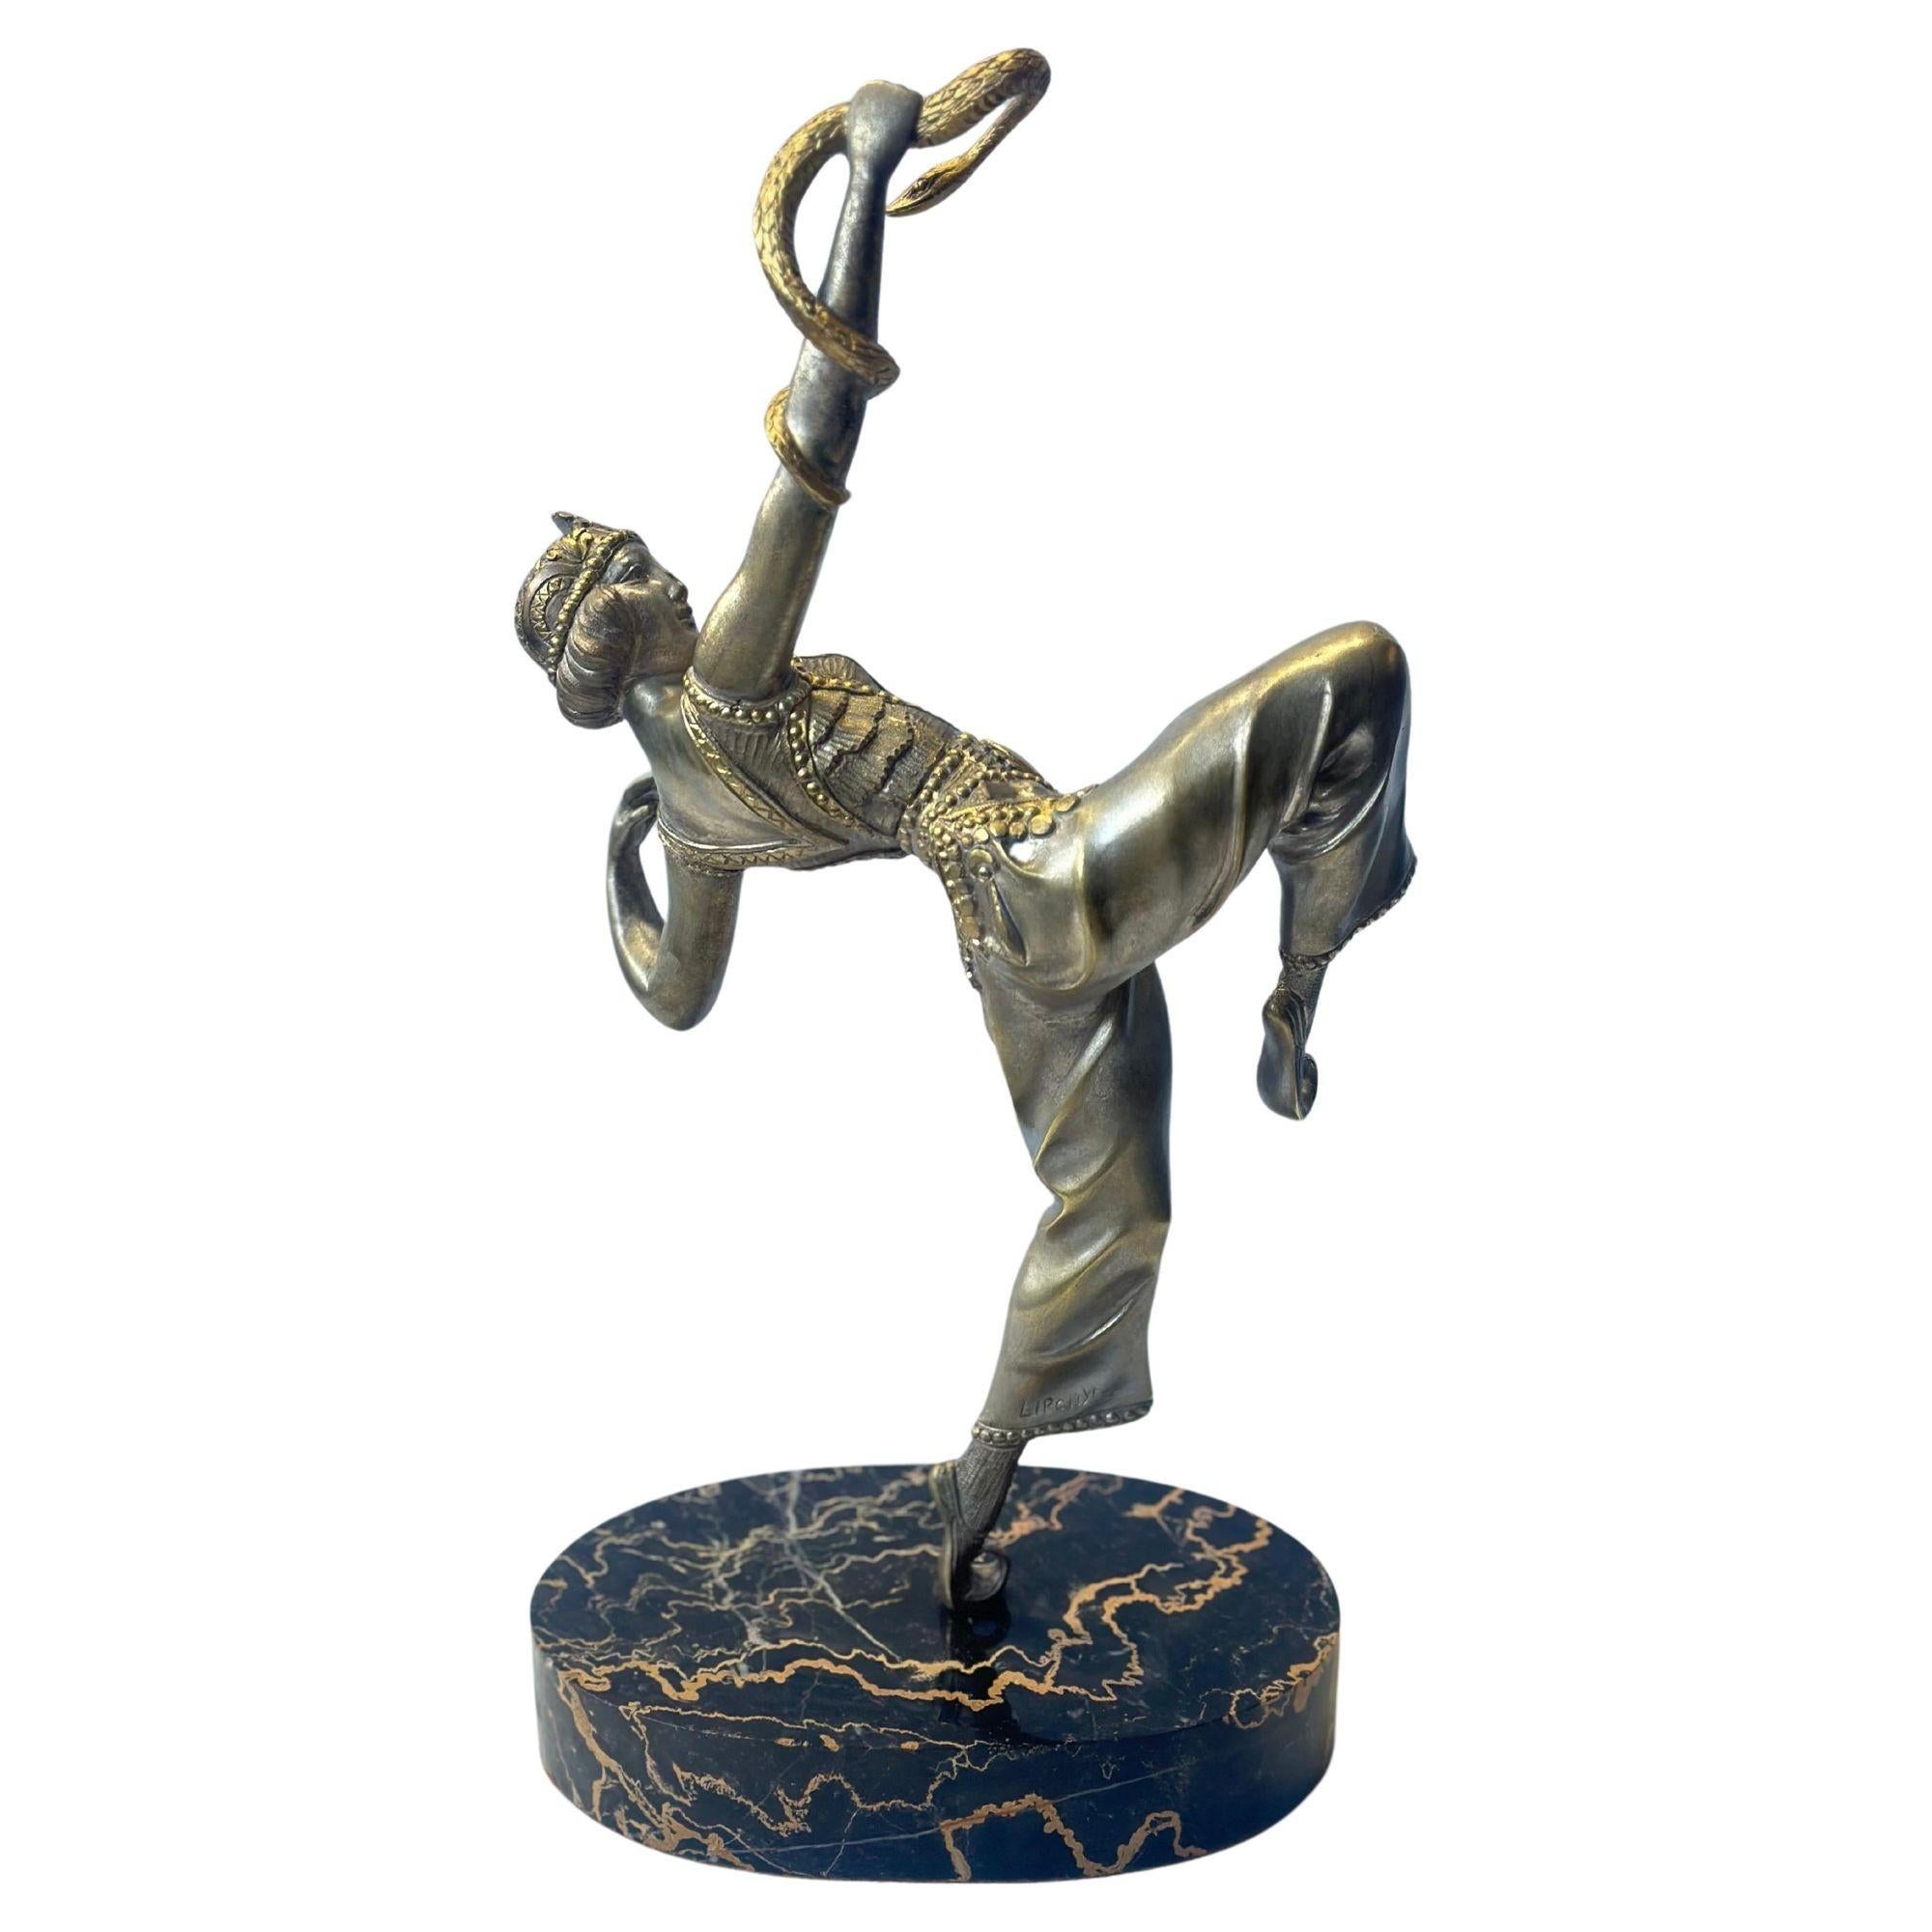 French Art Deco patinated bronze sculpture of a snake charmer orientalist dancer holding an alluring pose, while having a snake wrapped around her arm. It is standing on an oval black veined marble base. Made by Samuel Lipchytz in c.